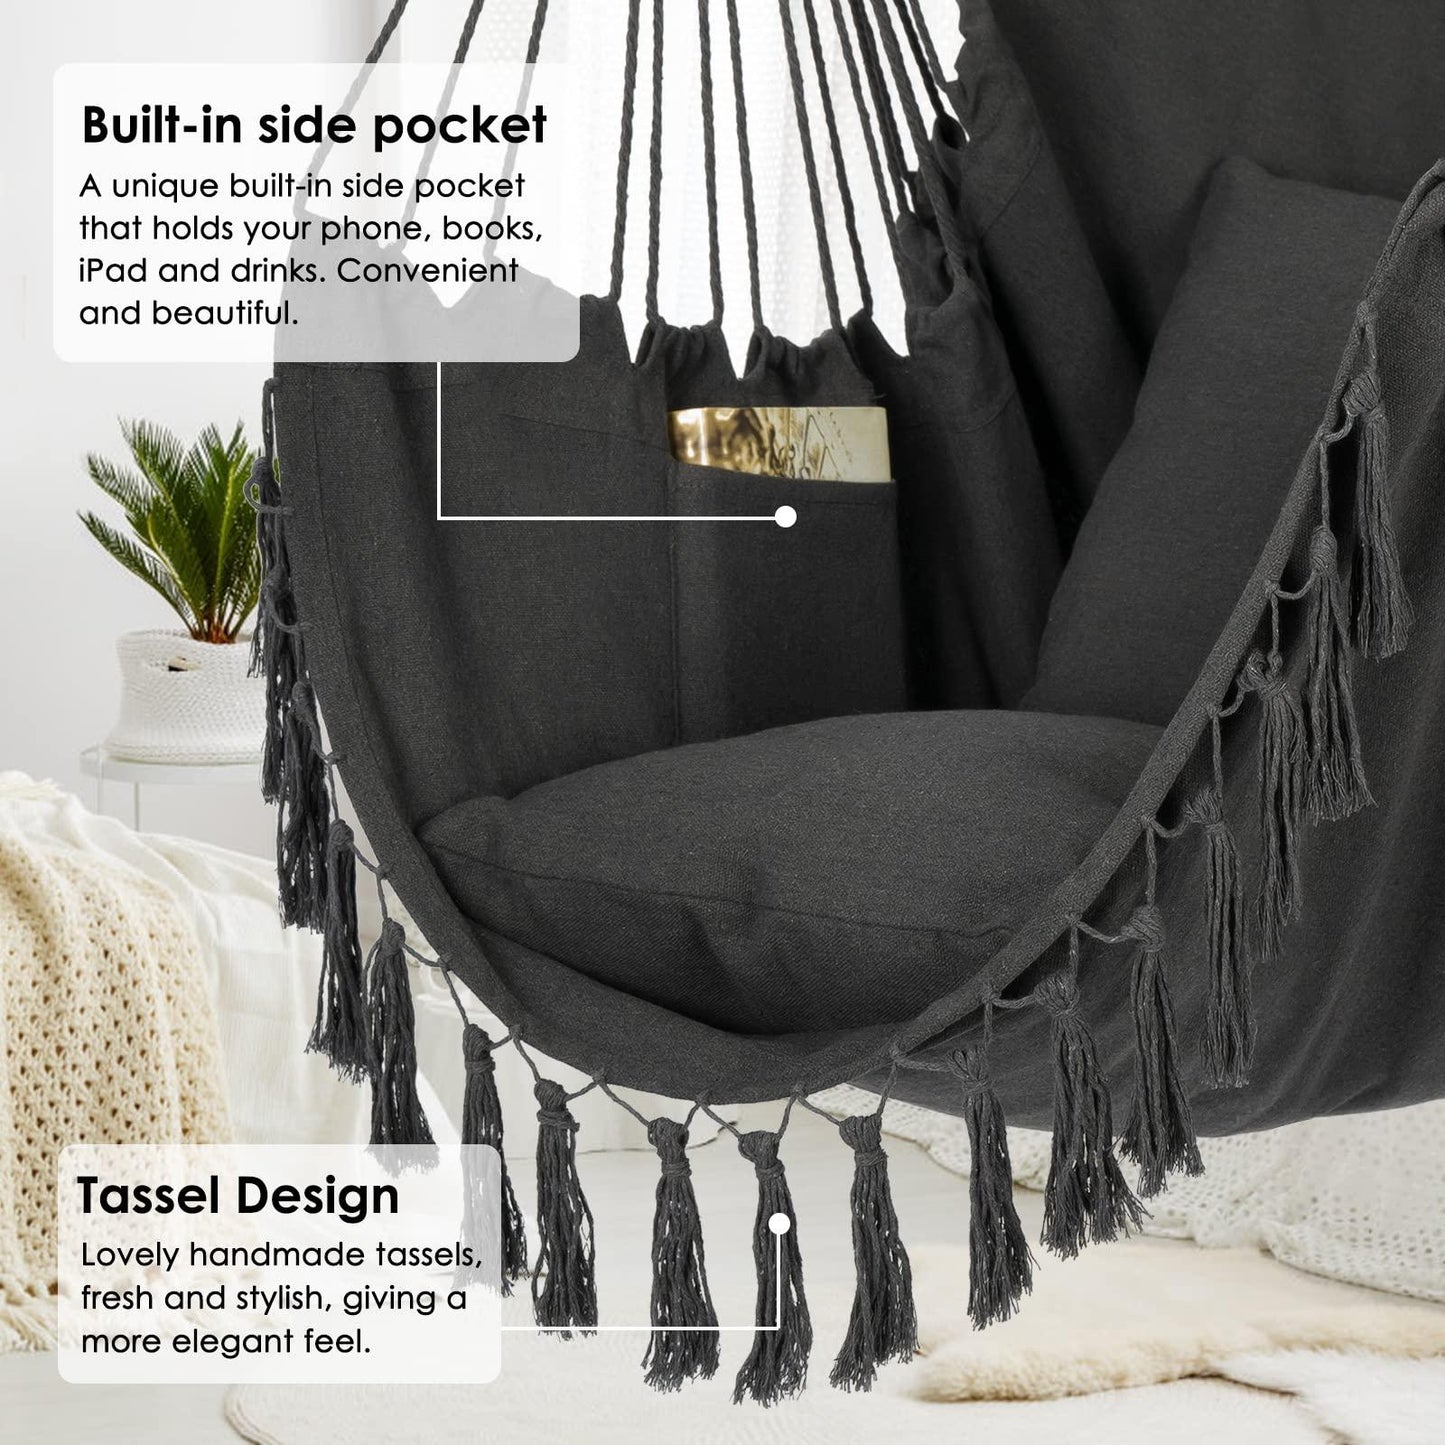 Y- STOP Hammock Chair Hanging Rope Swing, Max 500 Lbs, 2 Cushions Included, Large Macrame Hanging Chair with Pocket, Cotton Weave for Superior Comfort, Durability (Dark Grey) - CookCave